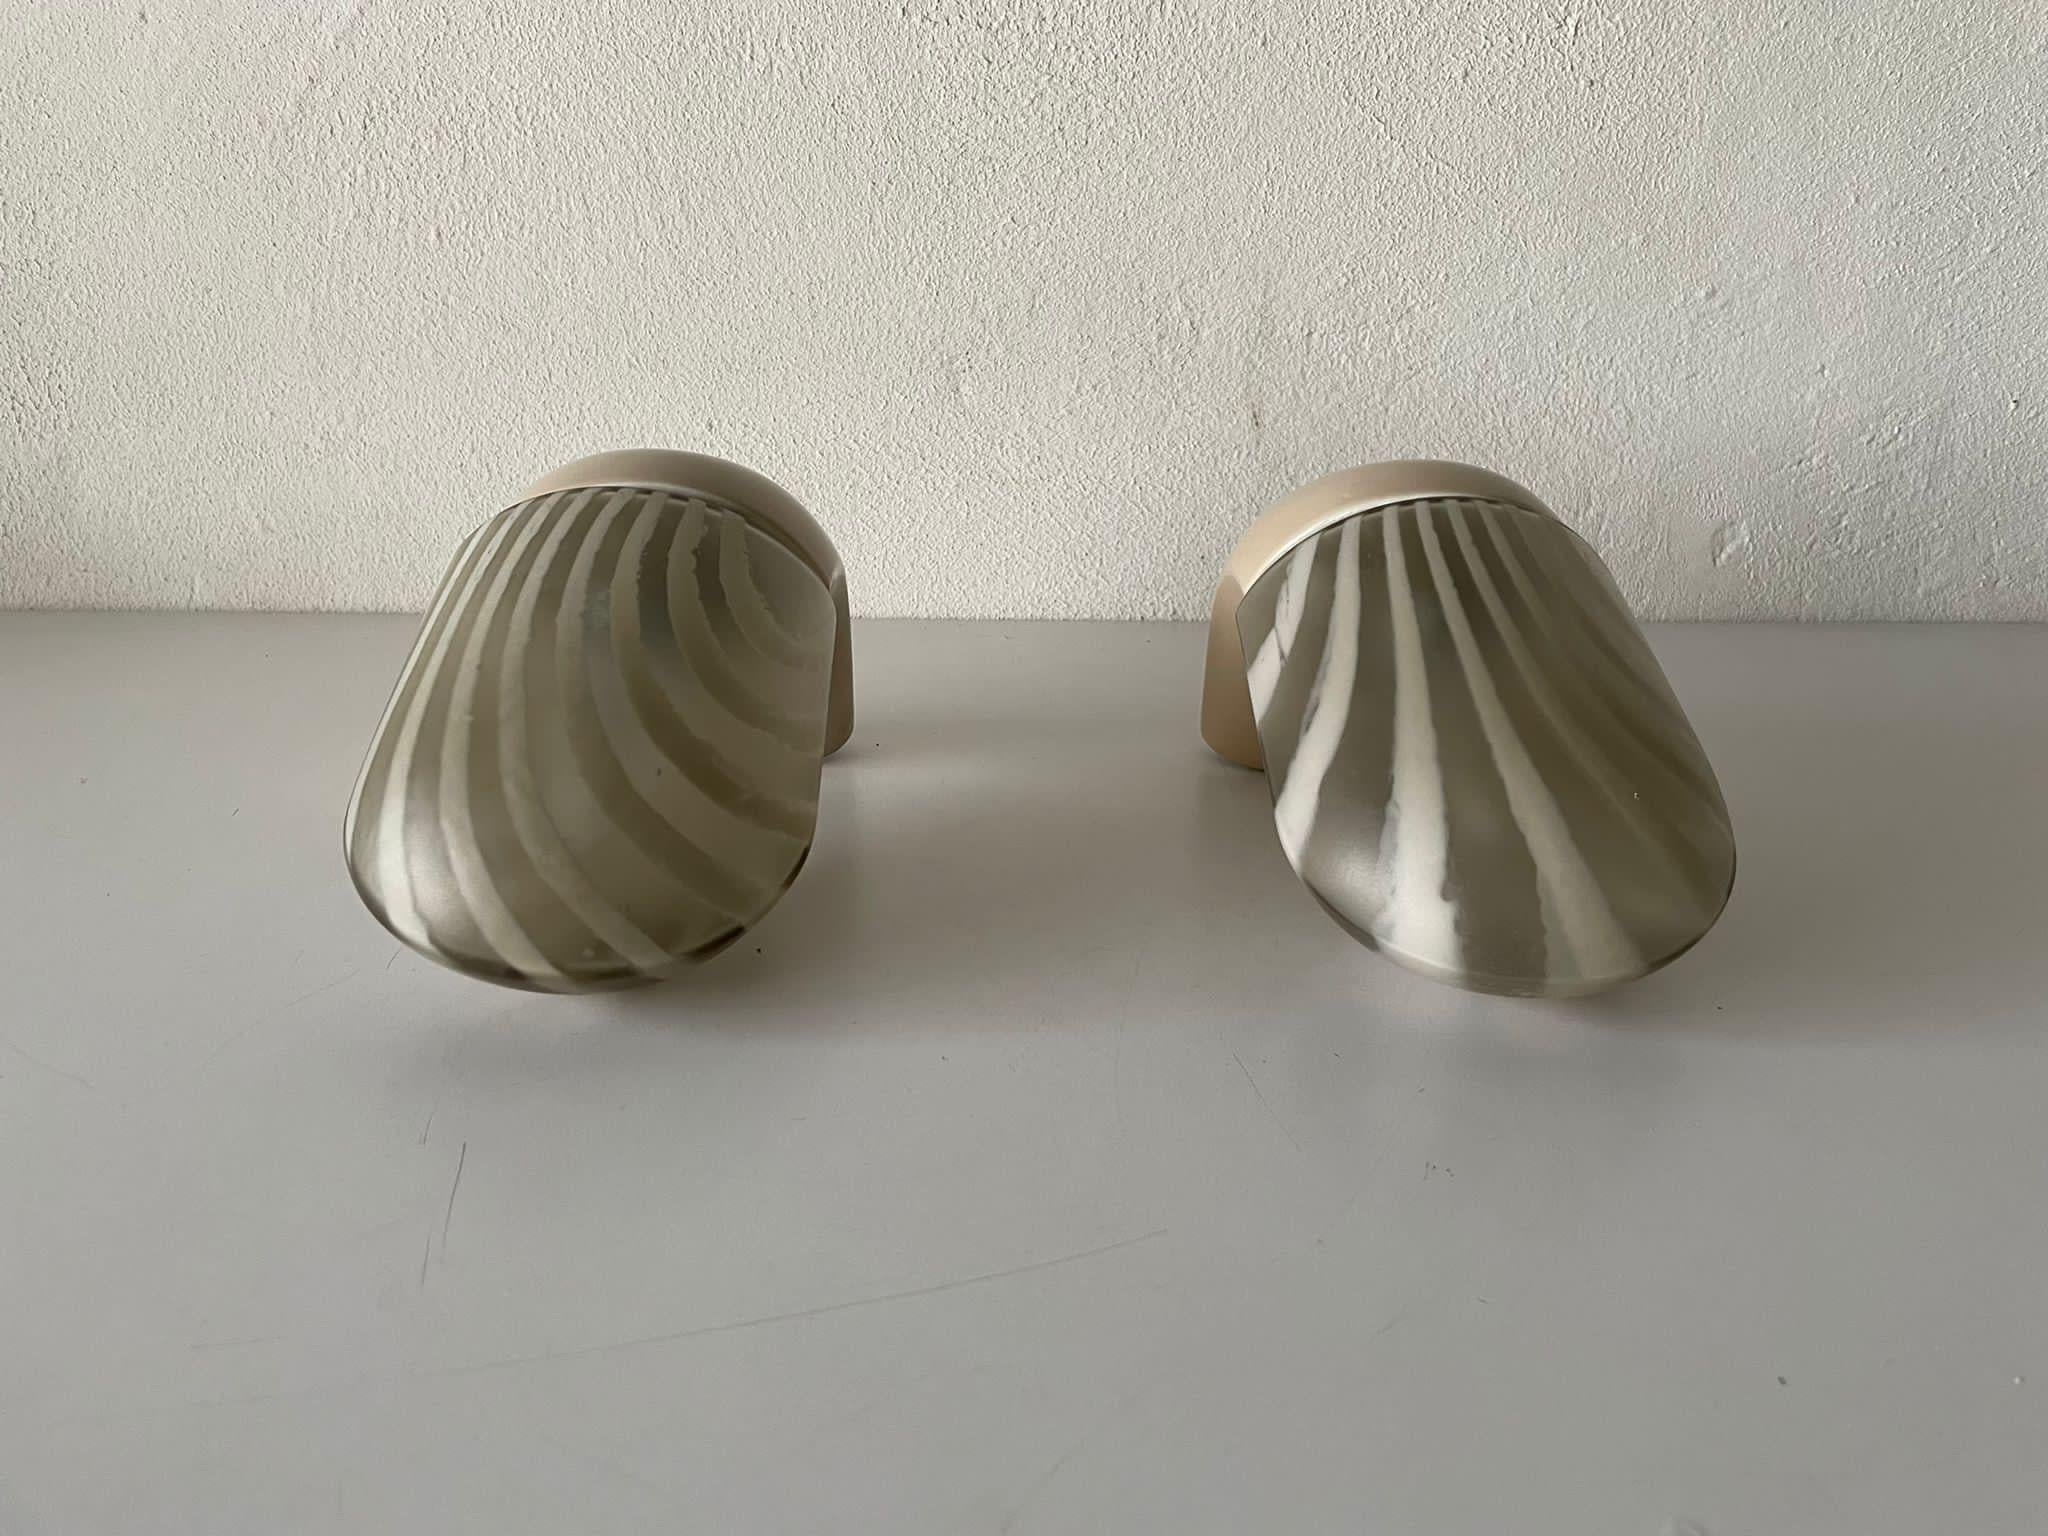 Rare pair of bathroom lamps by Peill Putzler, 1970s, Germany

Very elegant and Minimalist wall lamps

Lamps are in very good condition.

These lamps works with E14 standard light bulbs. Each lamp works with 1 light bulb. Max 40 W
Wired and